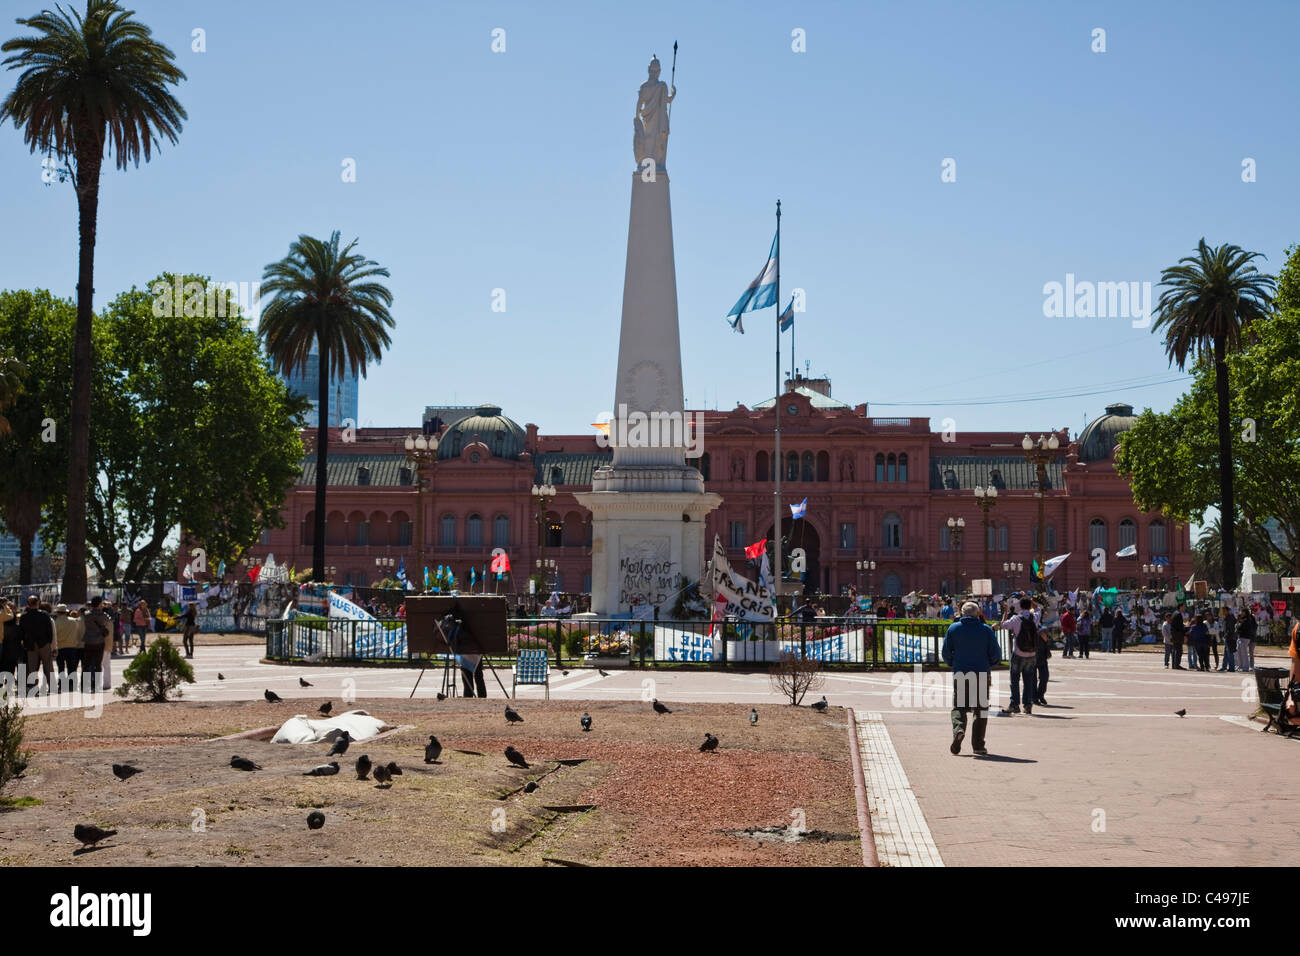 View of the Casa Rosada, Plaza De Mayo, Buenos Aires, Argentina, South America, with demonstration in front. Stock Photo